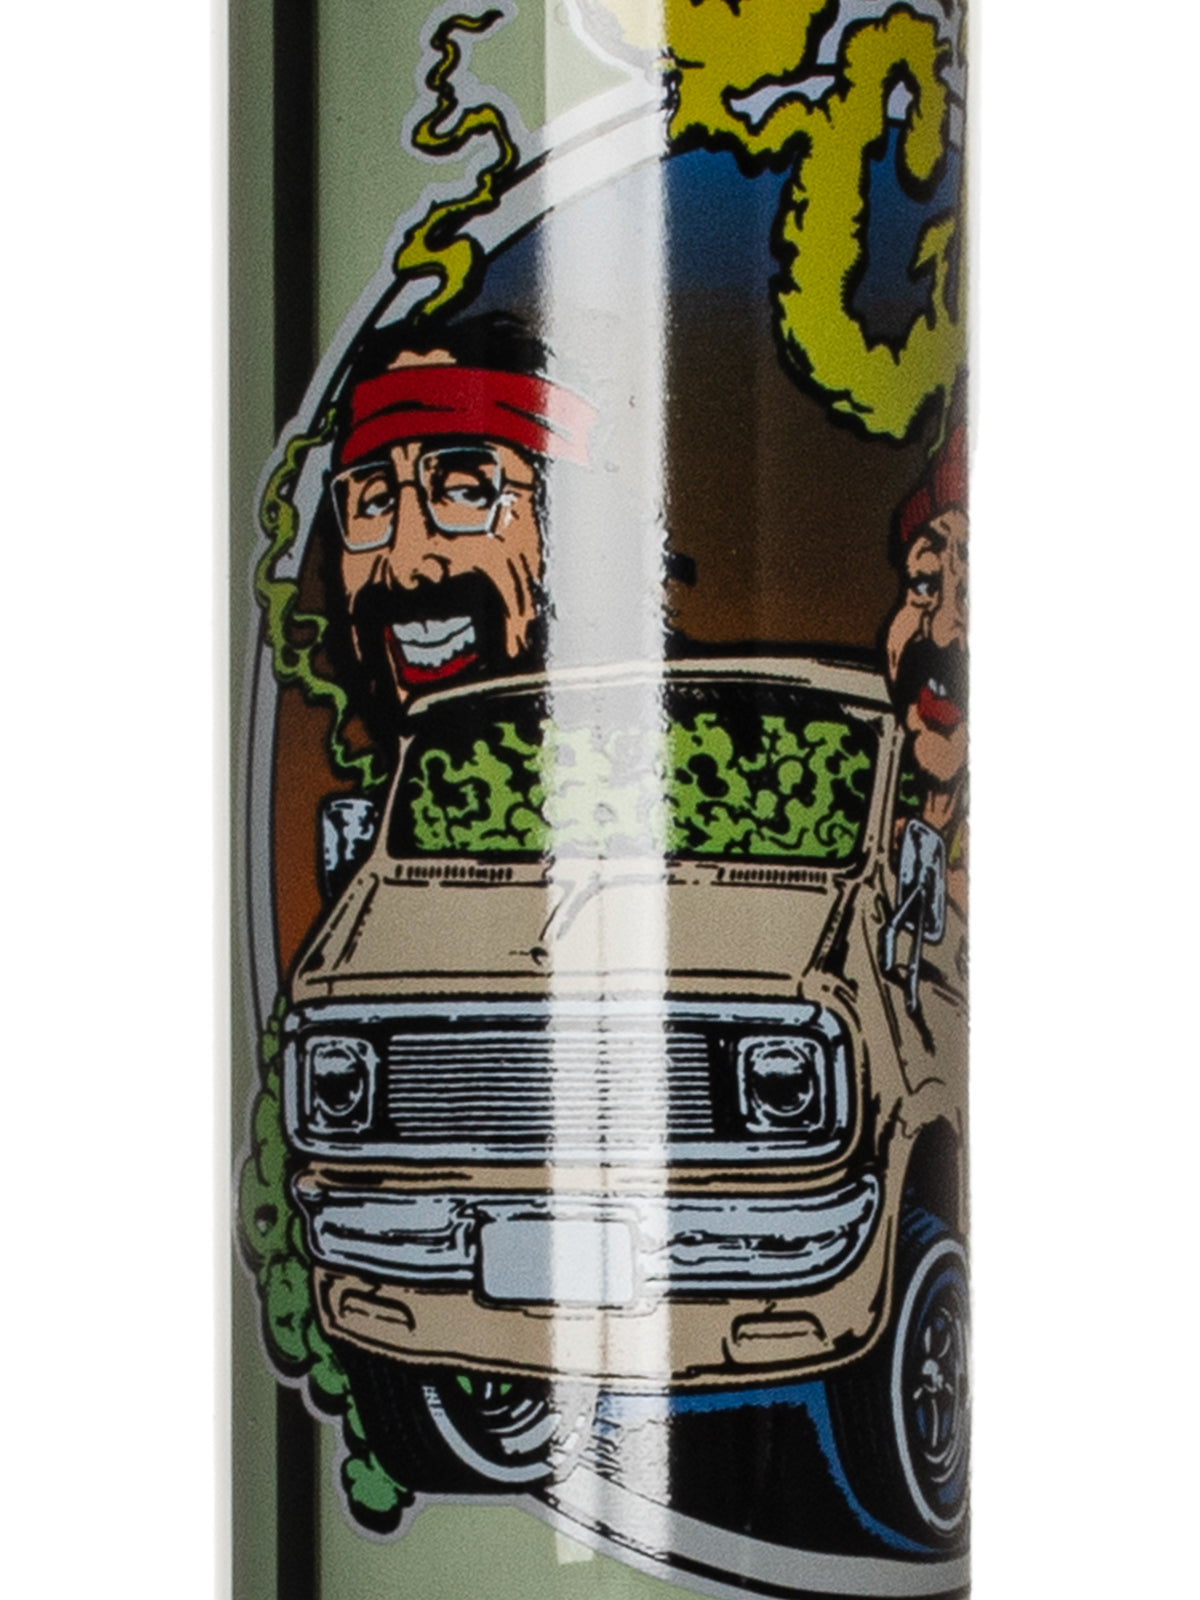 12" 7mm Thick Van Sidekick Water Pipe (Limited Edition of 420)